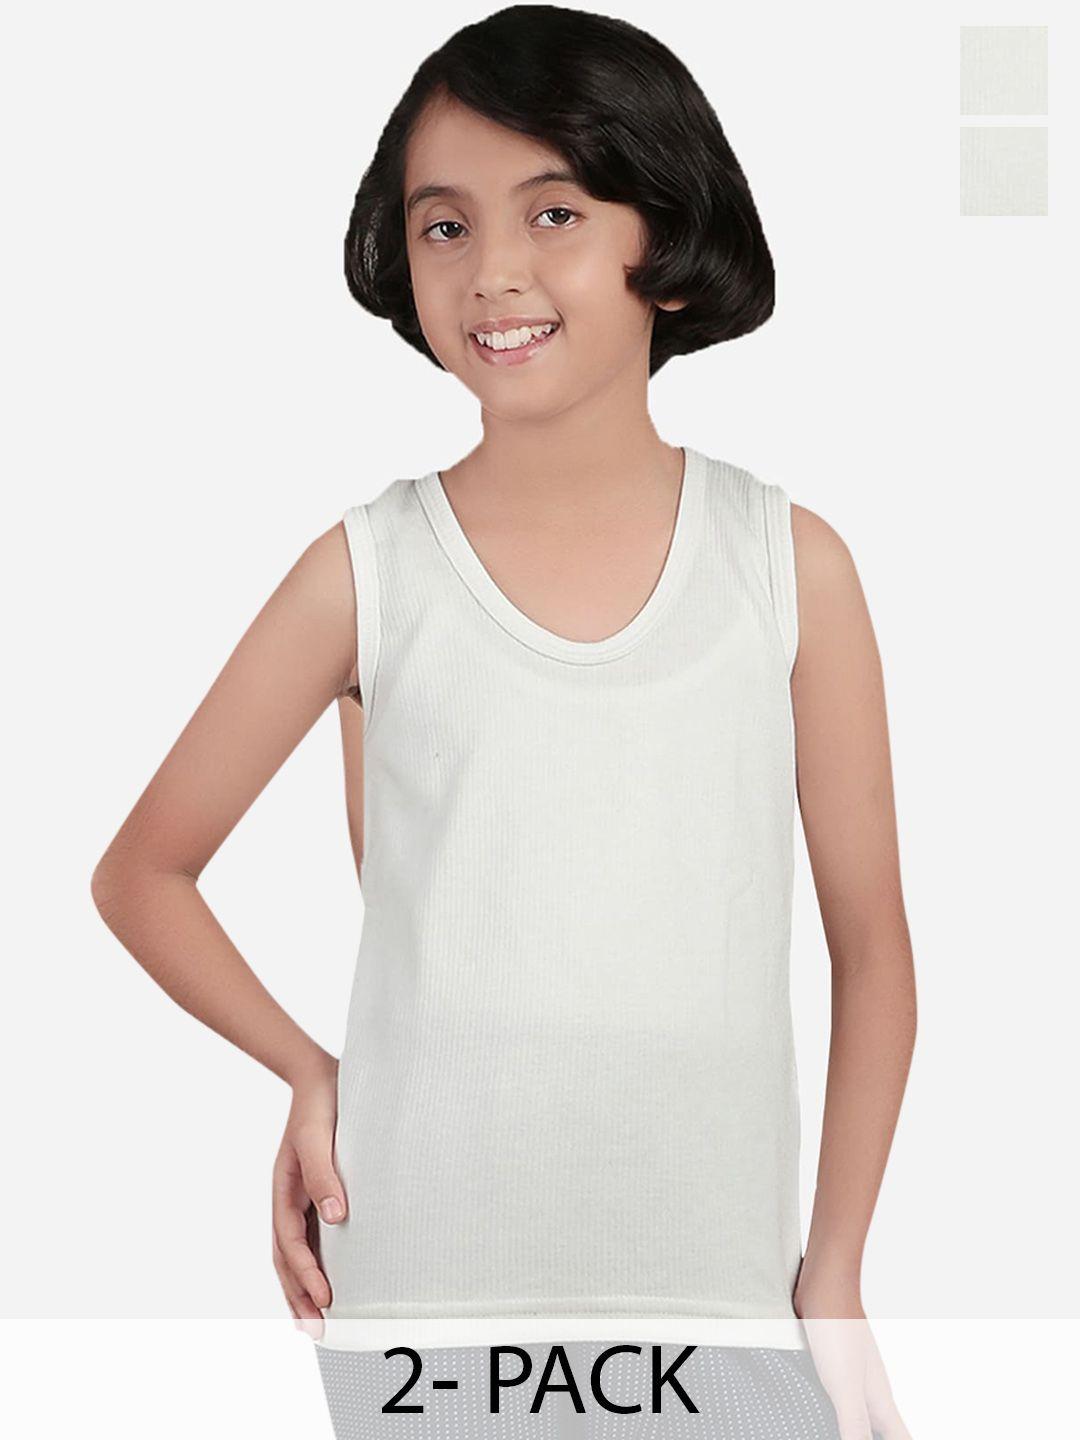 bodycare insider kids pack of 2 round neck sleeveless cotton thermal tops